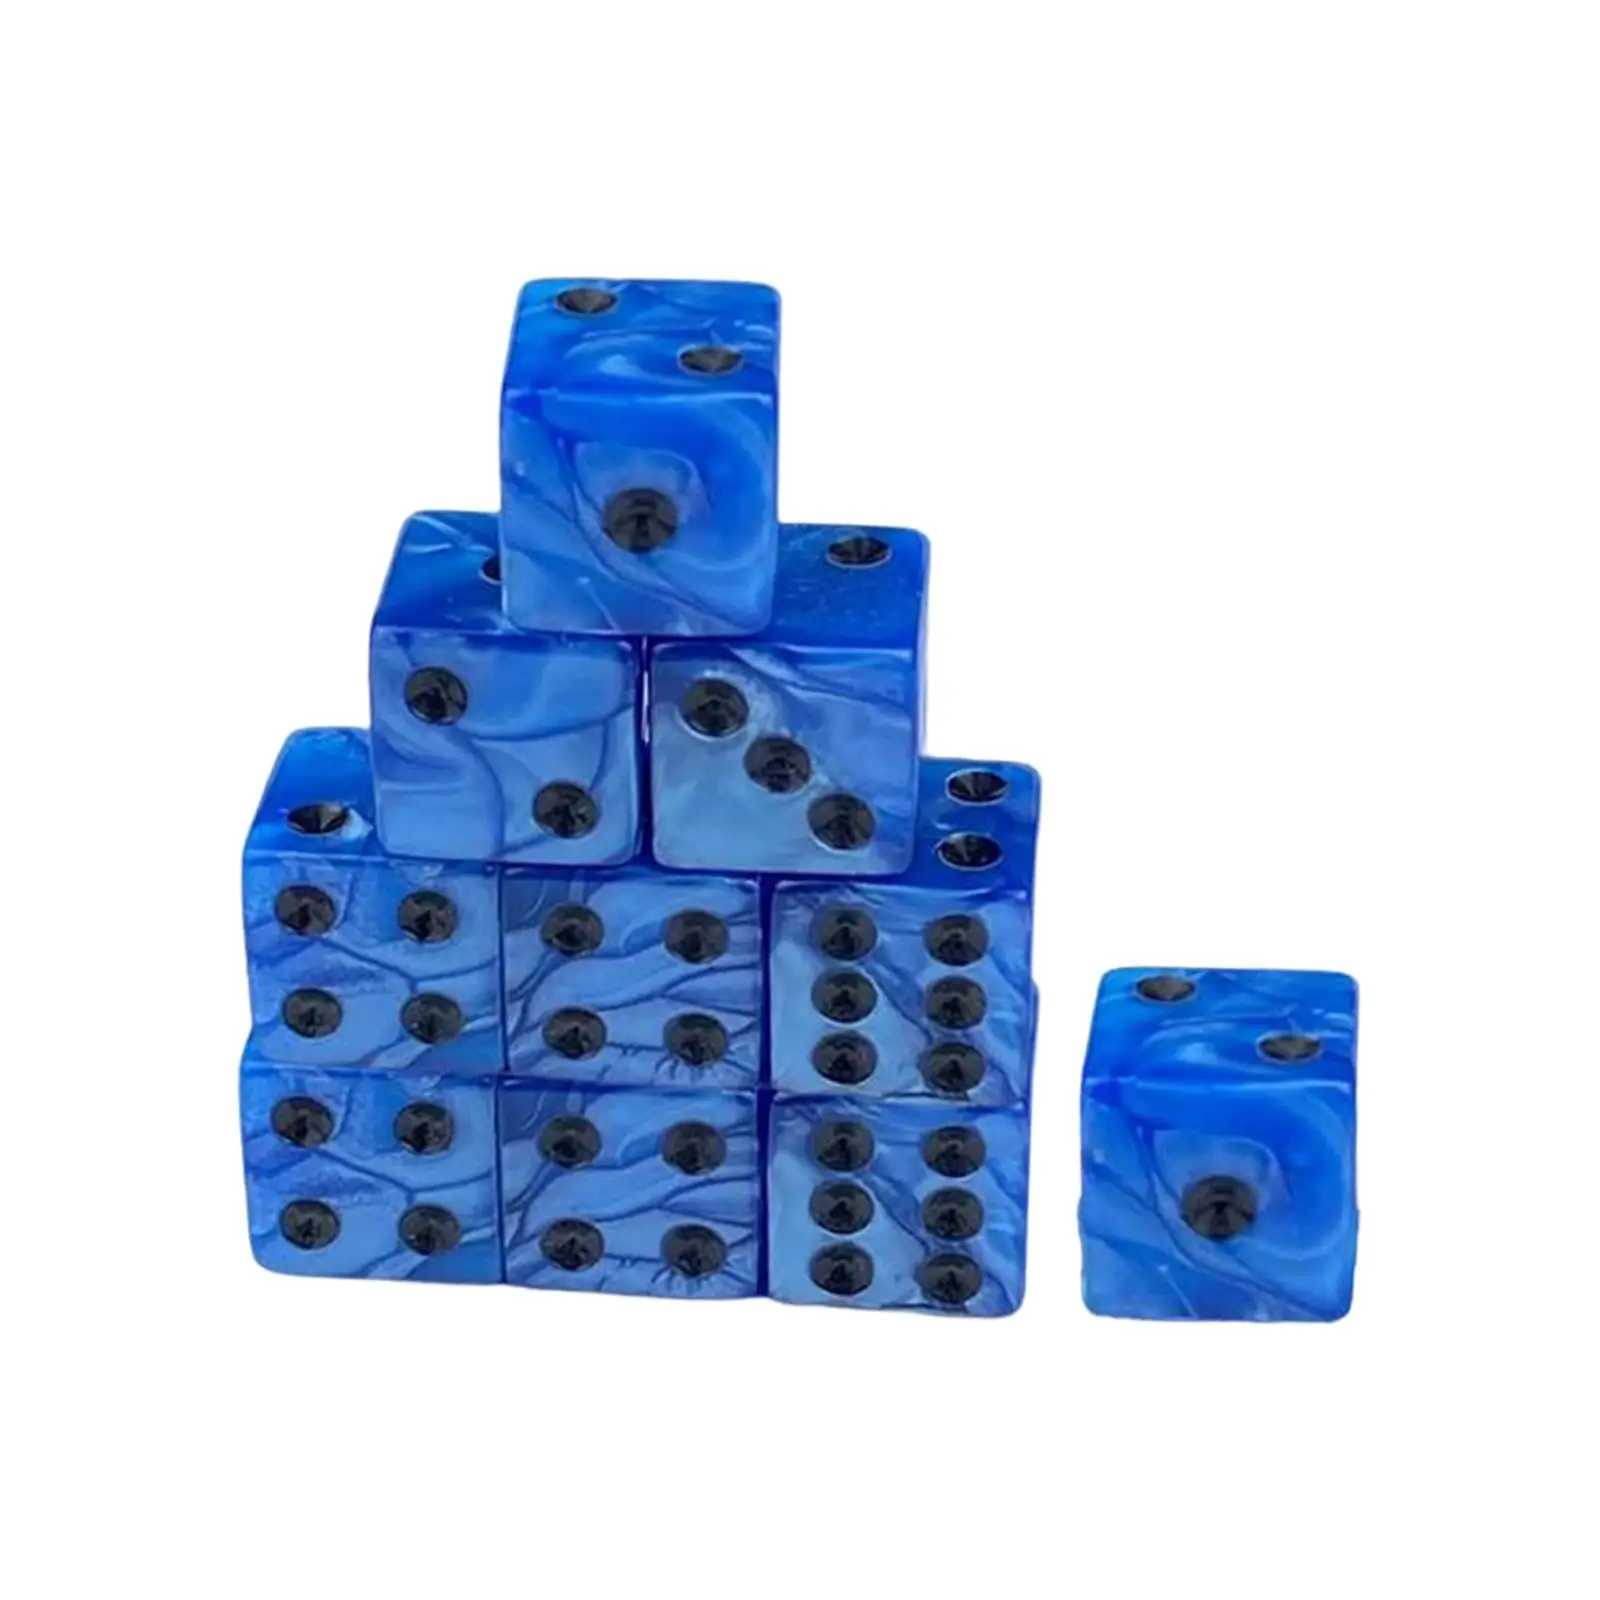 10Pcs Round Corner Dice 0.6inch Teaching Aids Game Dices for Role Play Party